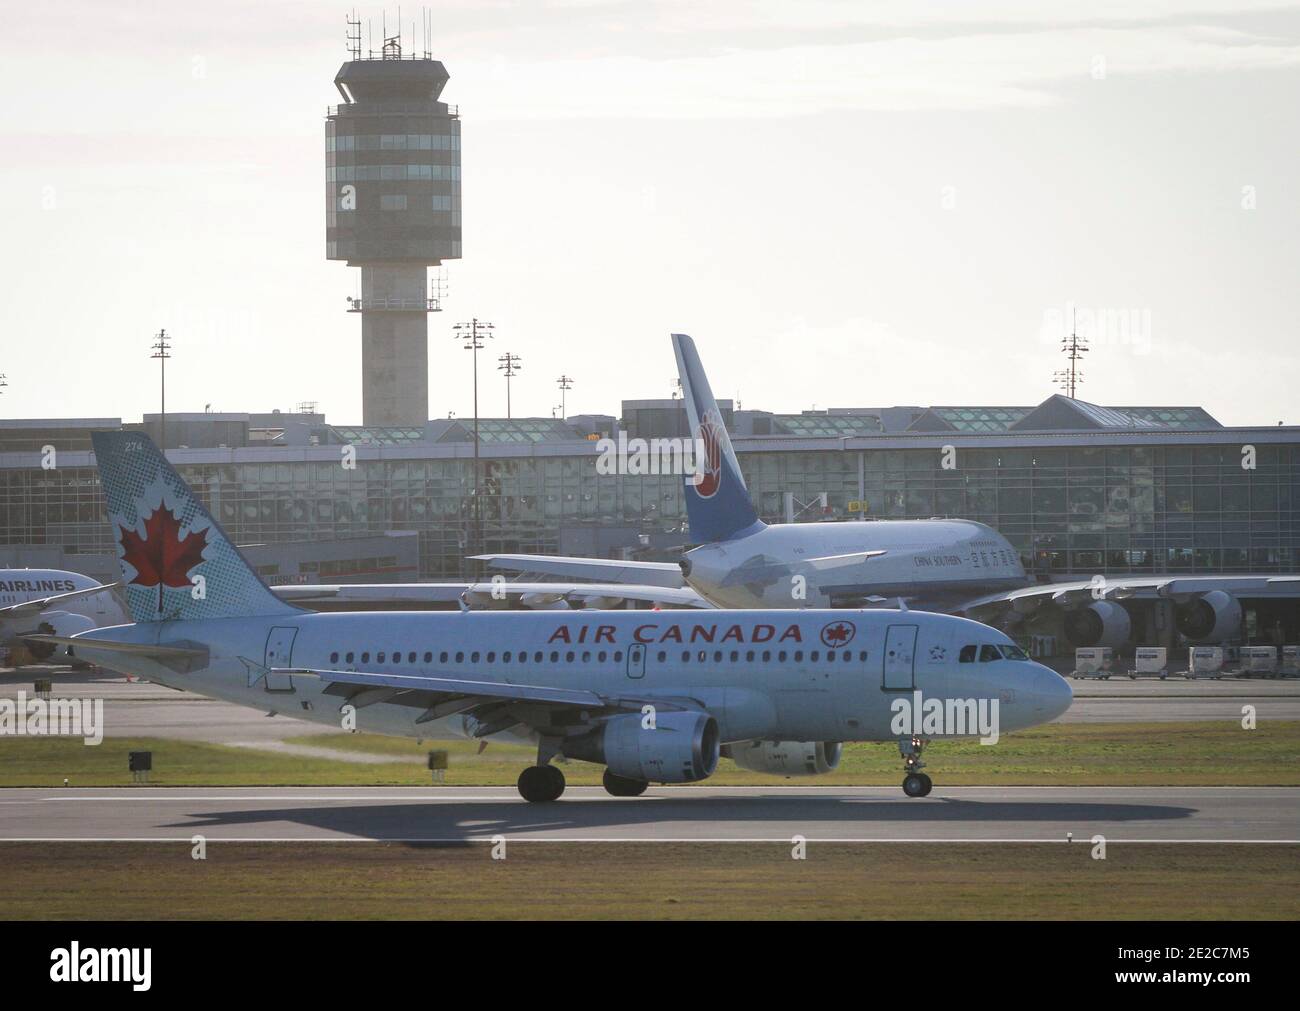 Richmond, Canada. 13th Jan, 2021. An air Canada aircraft is seen on the runway of Vancouver International Airport in Richmond, British Columbia, Canada, Jan. 13, 2021. Air Canada announced on Wednesday that it is laying off about 1,700 employees due to official travel restrictions against the rampaging COVID-19 pandemic. Credit: Liang Sen/Xinhua/Alamy Live News Stock Photo